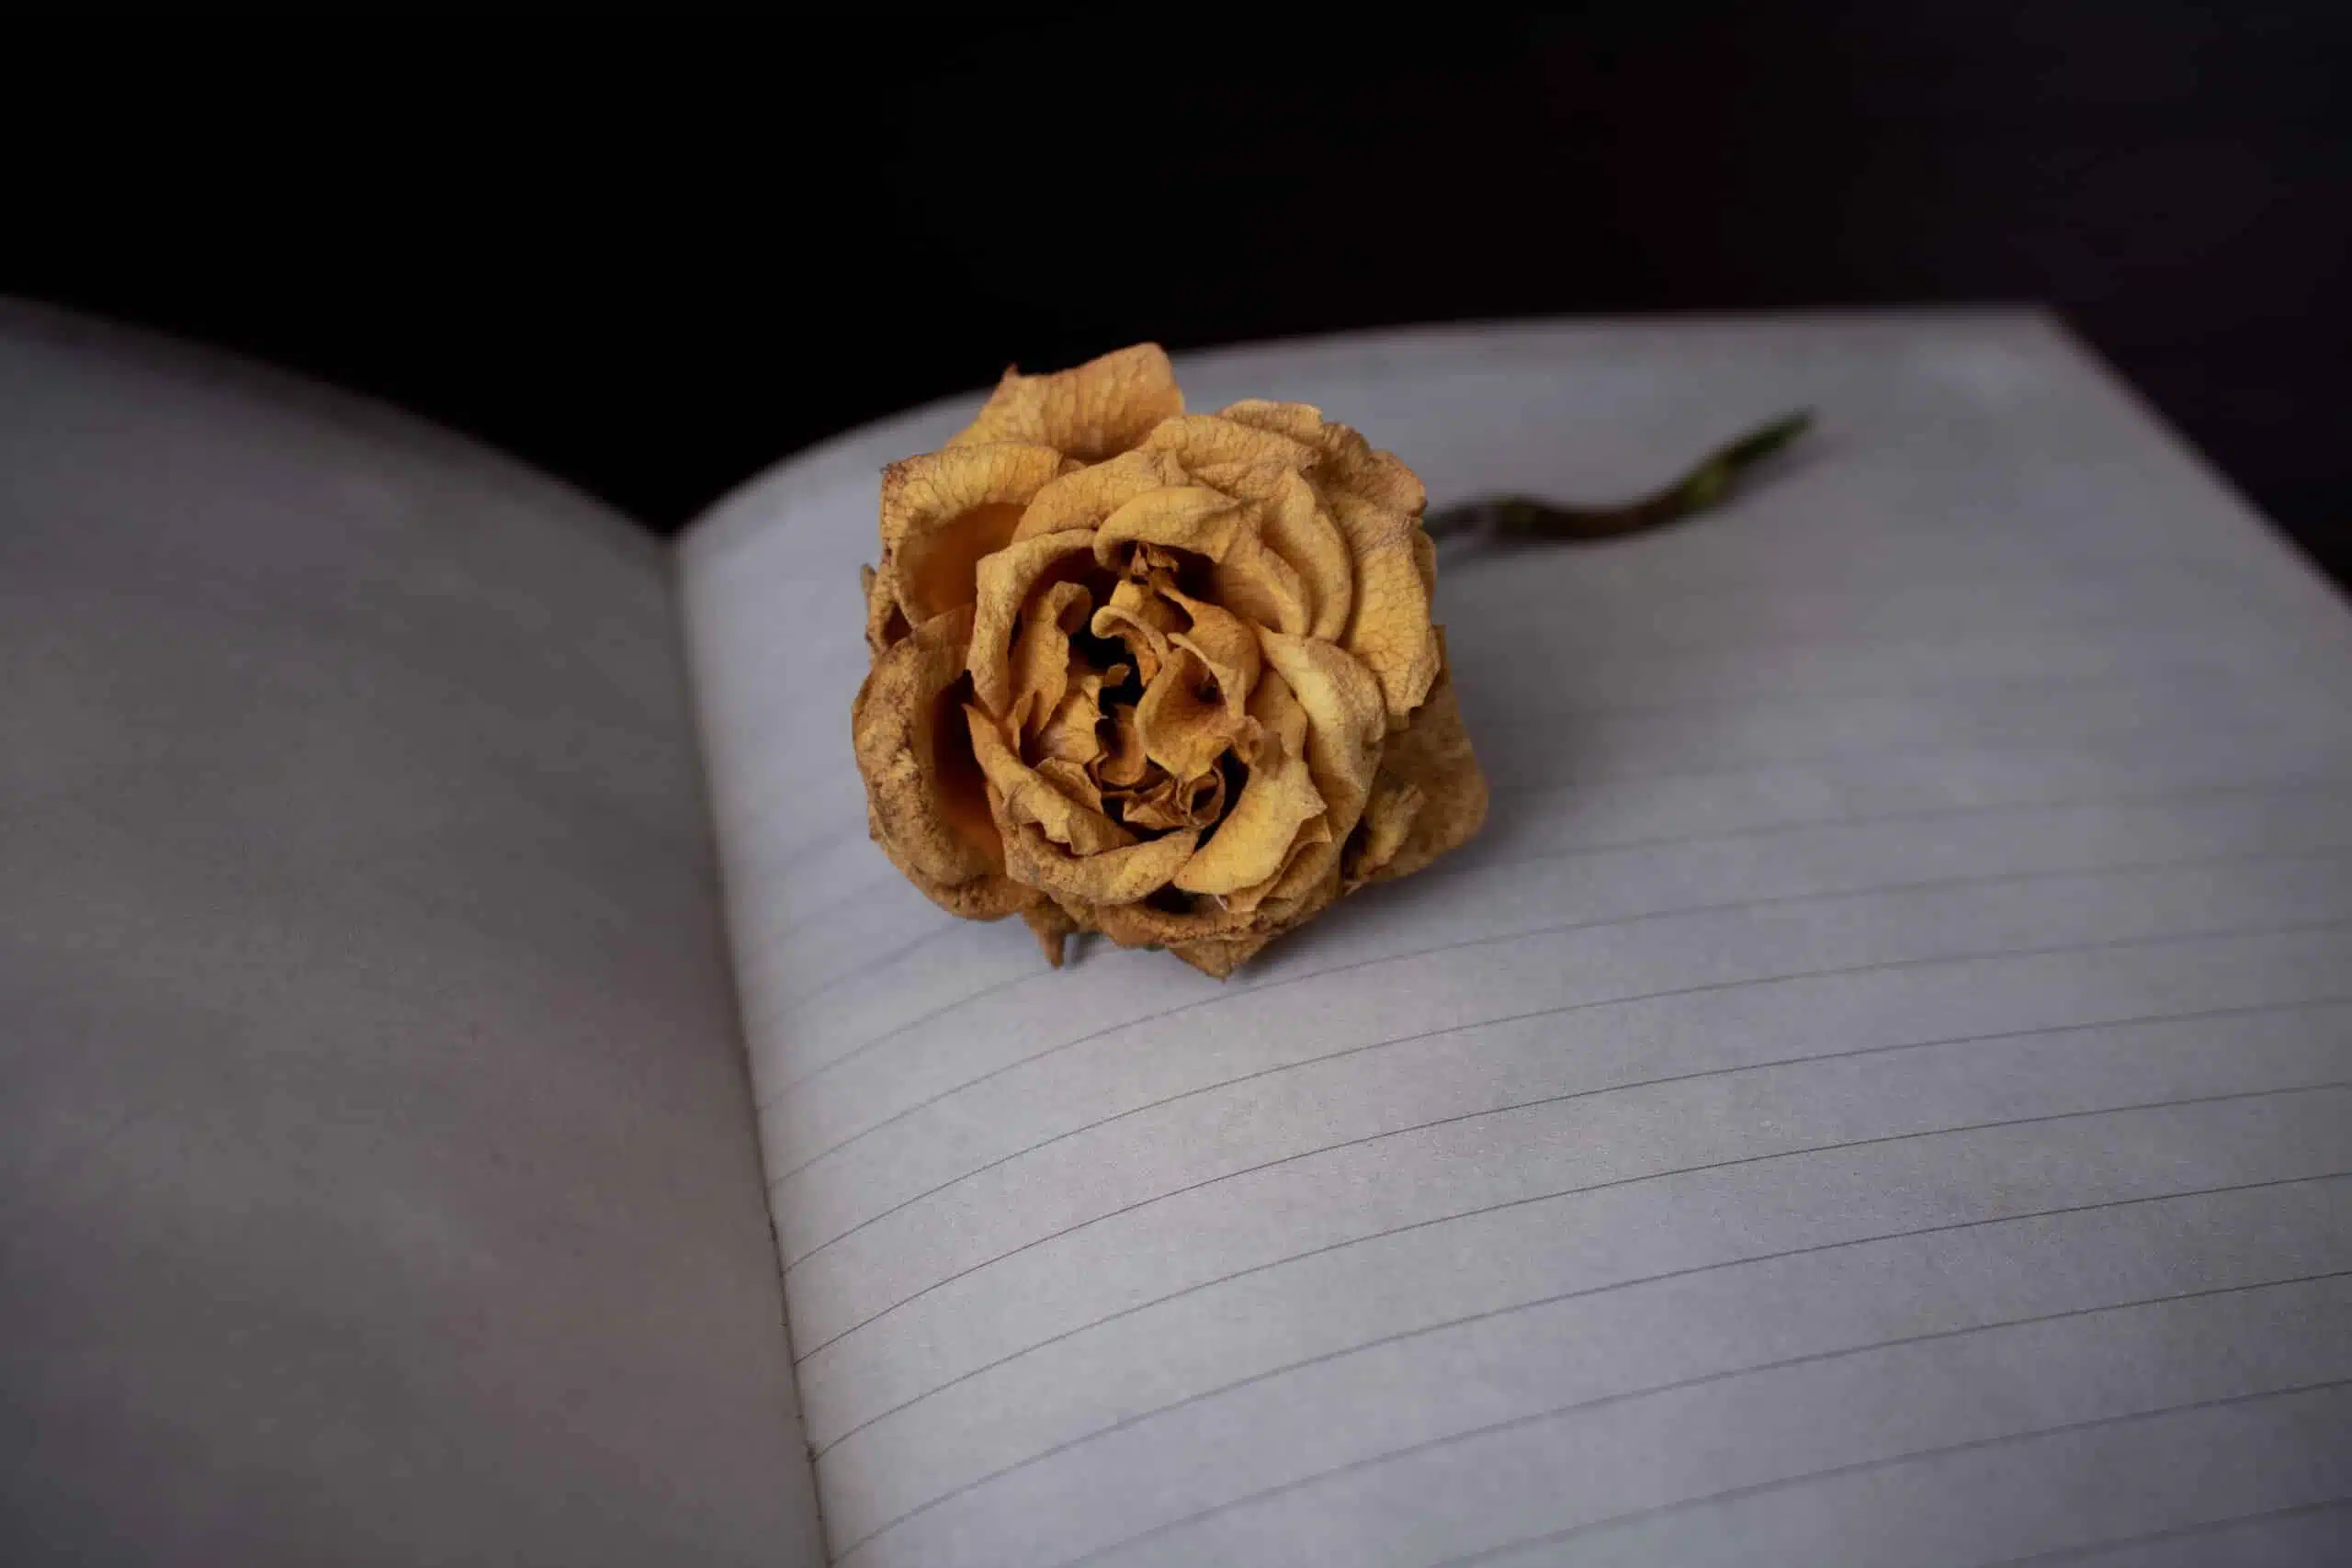 Wilted yellow rose lying on empty notebook